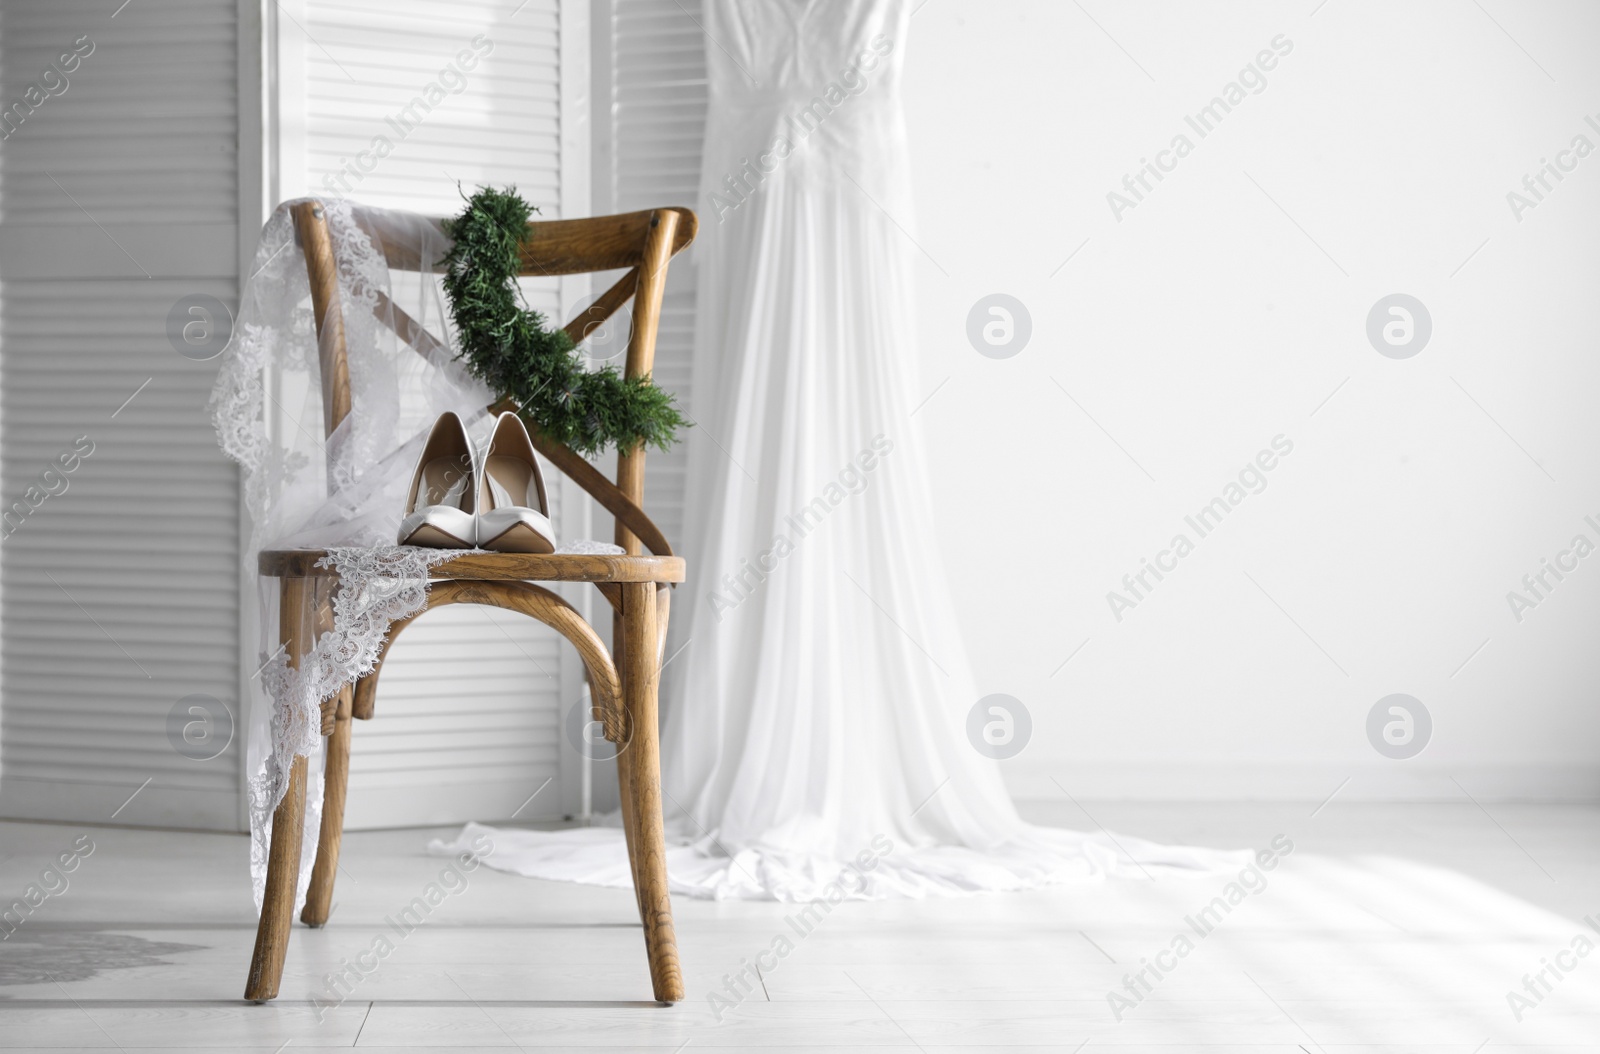 Photo of Pair of white high heel shoes, veil and wedding dress indoors. Space for text